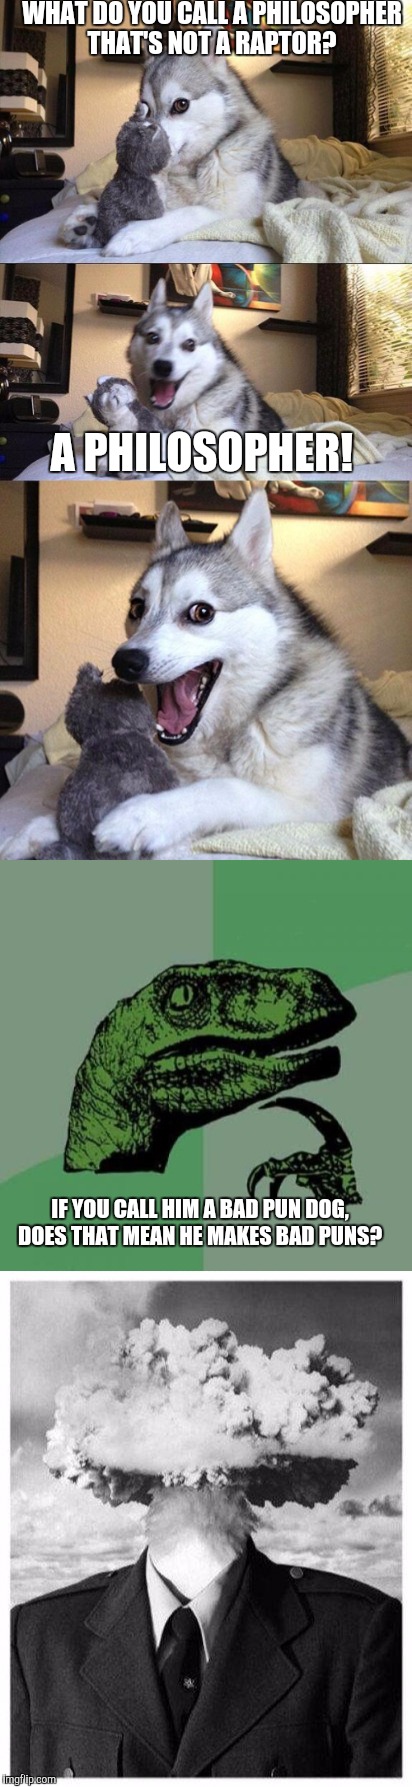 When two memes converse...  | WHAT DO YOU CALL A PHILOSOPHER THAT'S NOT A RAPTOR? A PHILOSOPHER! IF YOU CALL HIM A BAD PUN DOG, DOES THAT MEAN HE MAKES BAD PUNS? | image tagged in bad pun dog,philosoraptor,memes | made w/ Imgflip meme maker